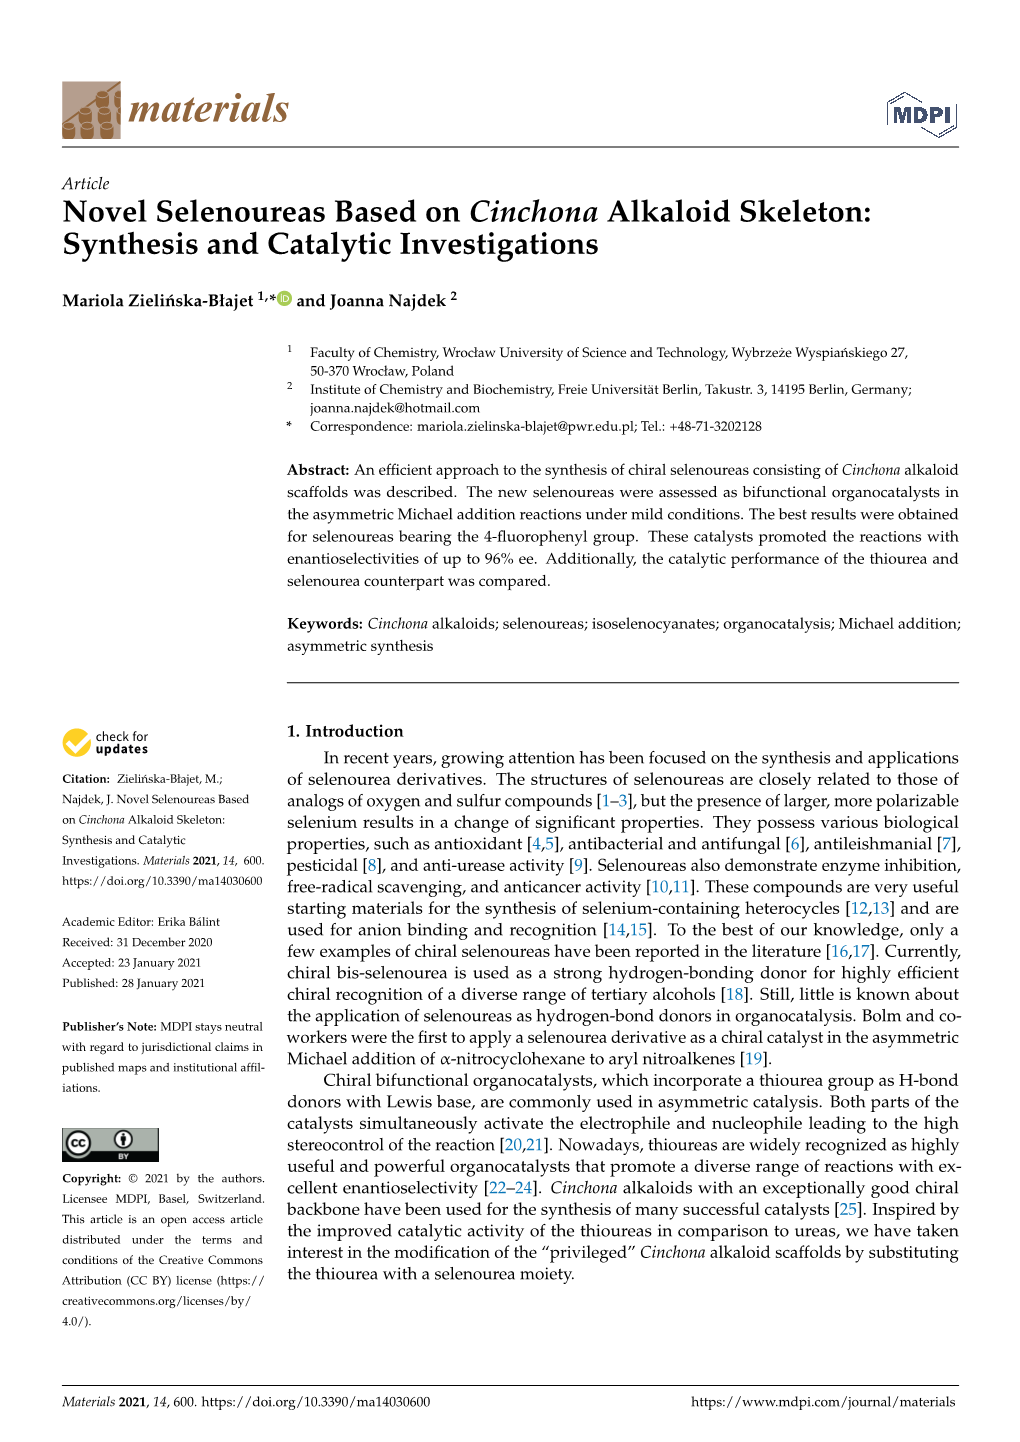 Synthesis and Catalytic Investigations